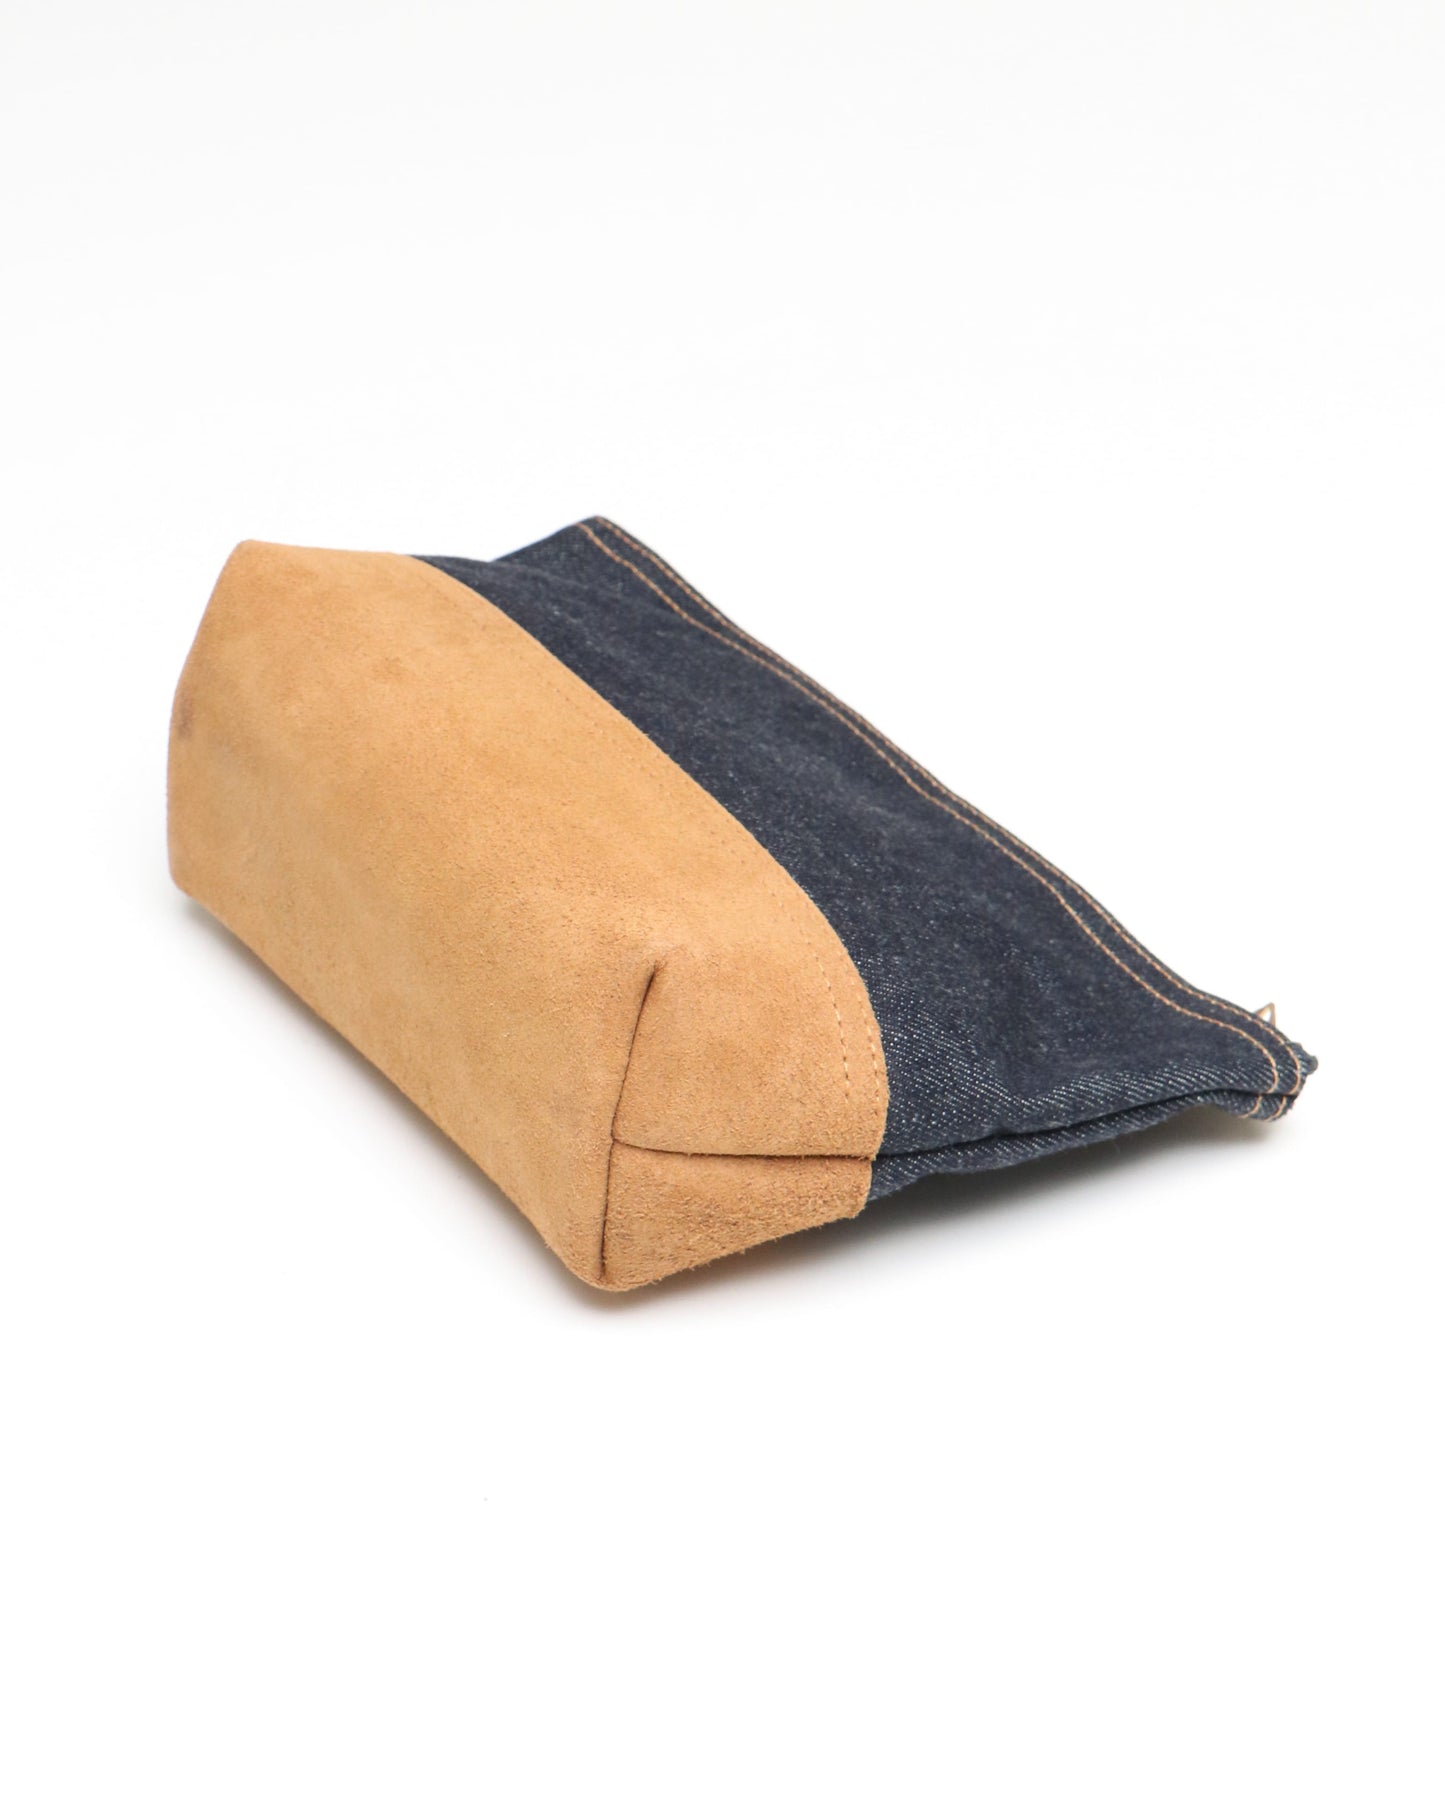 LG GUSSET-POUCH